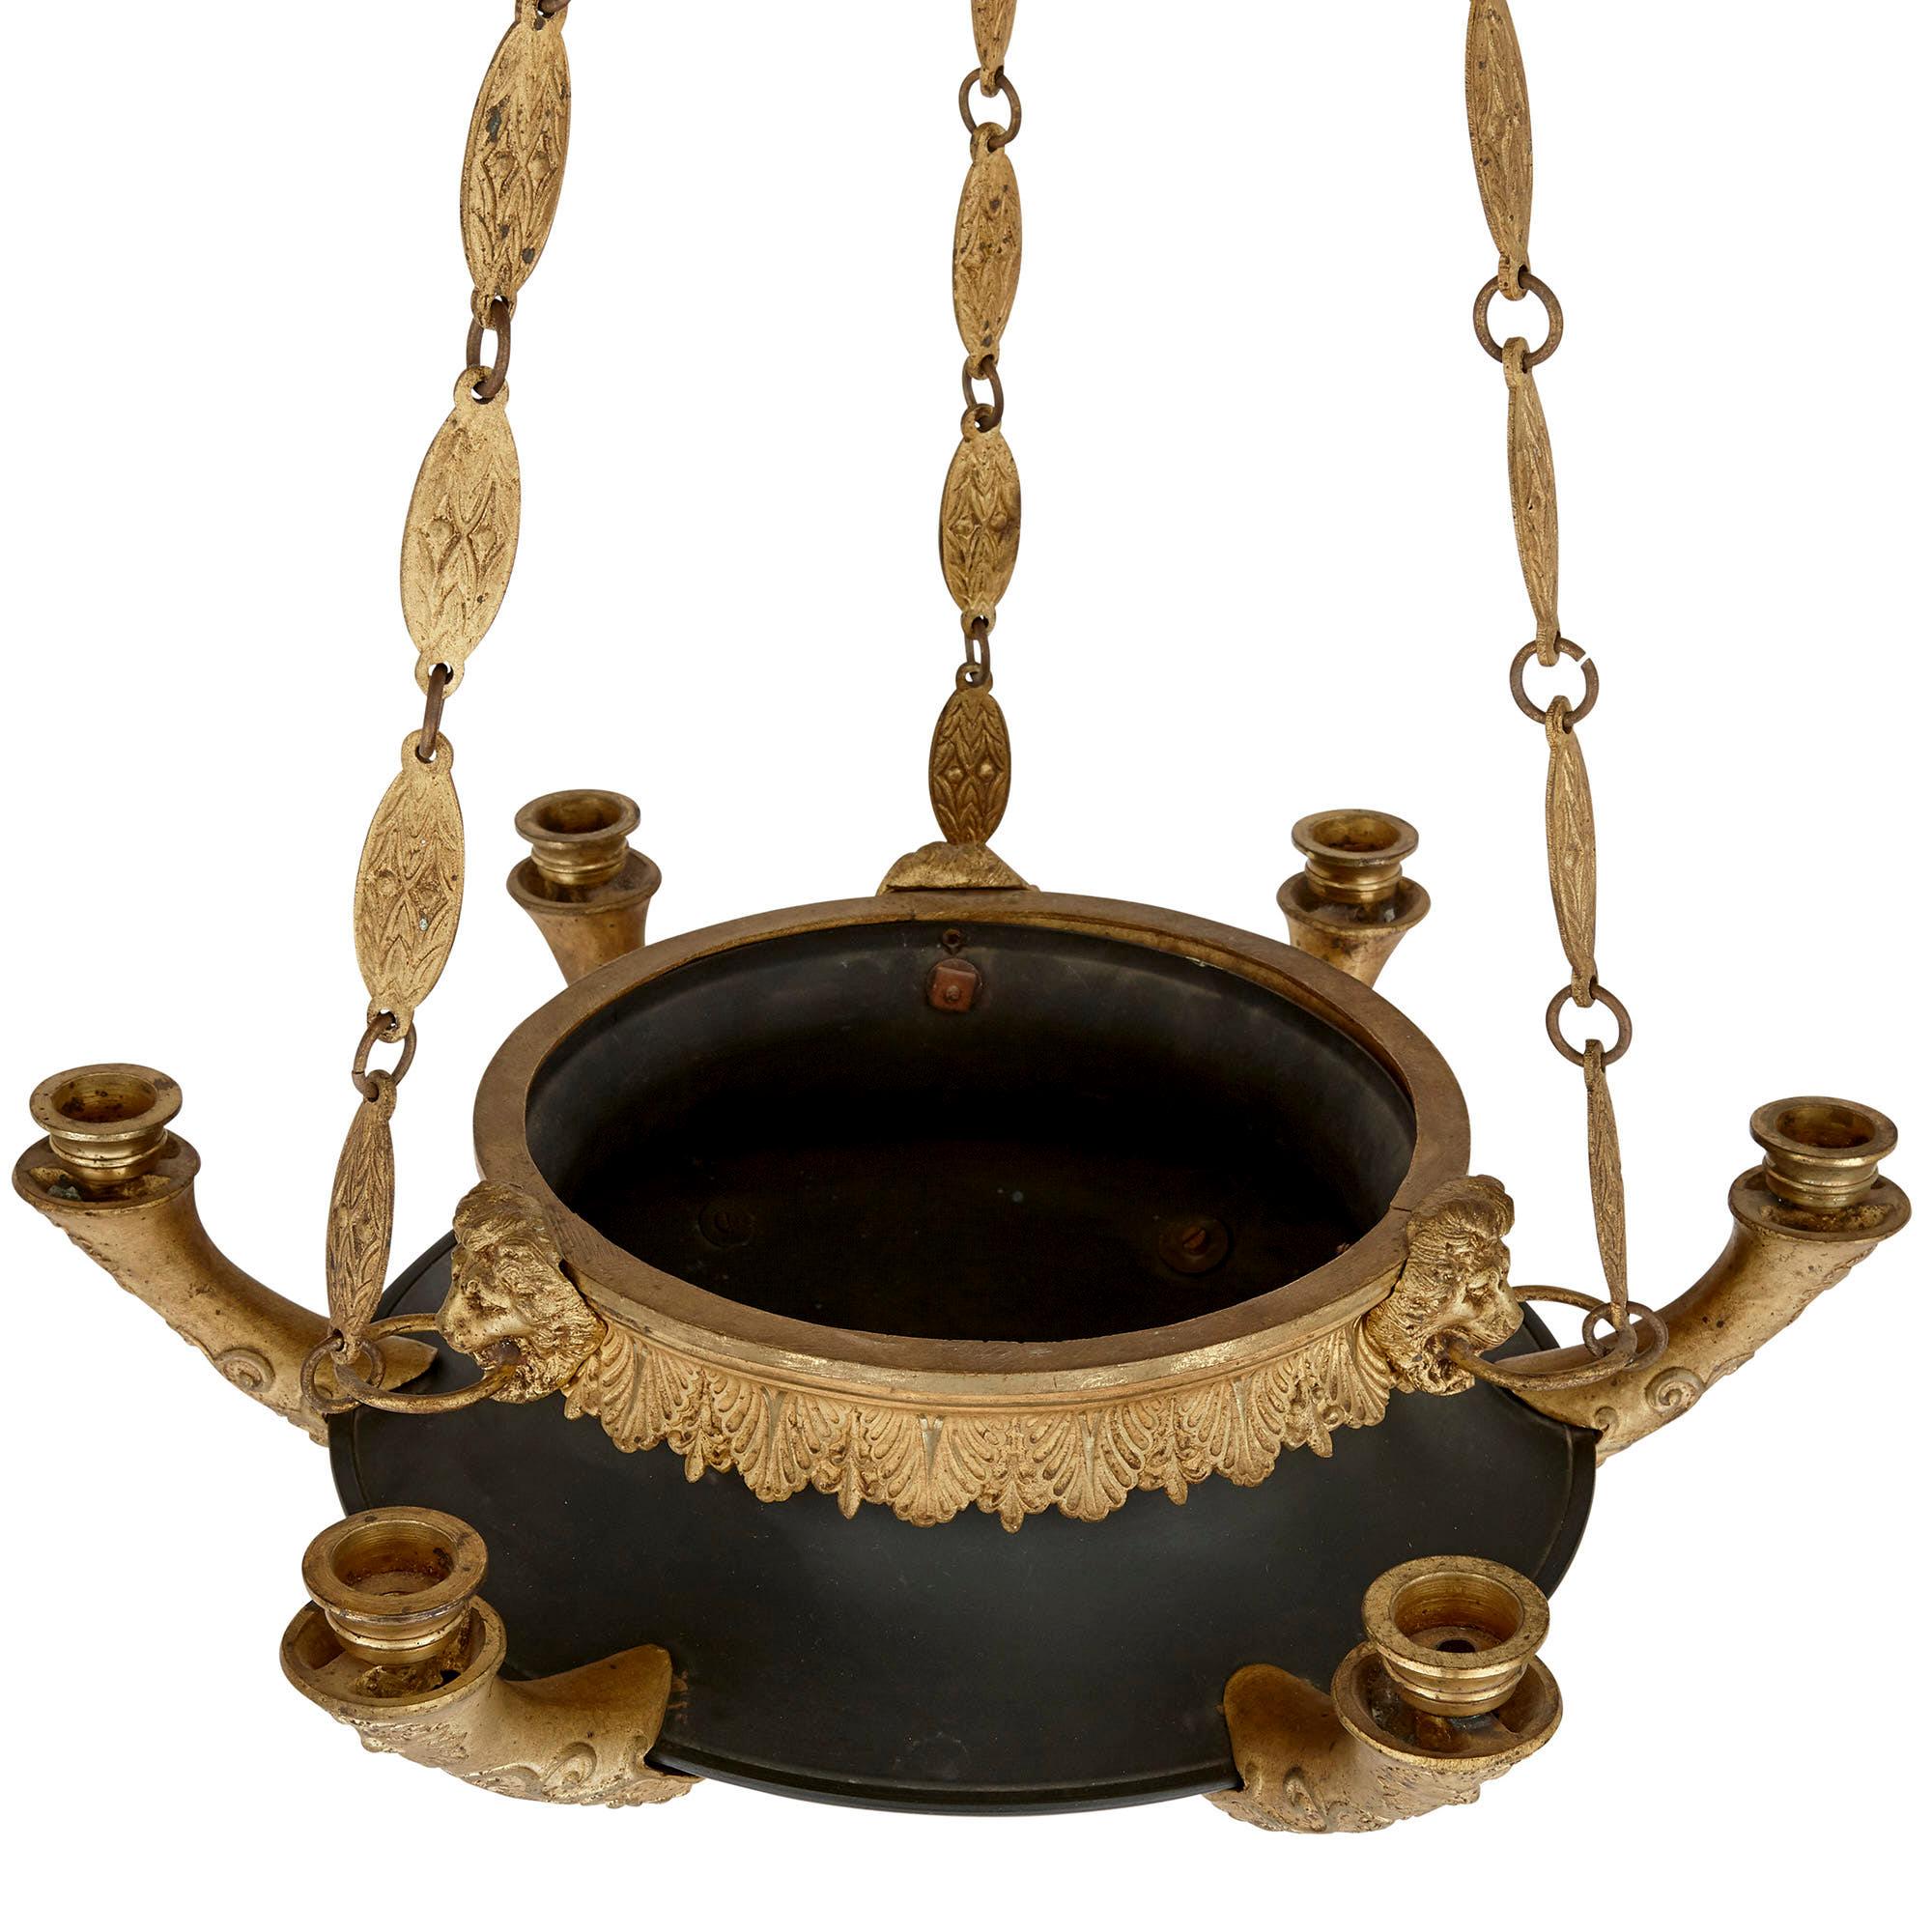 This unusual chandelier is designed in the Empire style from gilt and patinated bronze in the form of an ancient Roman terracotta or earthenware oil lamp. The patinated bronze bowl of the lamp is open at the top, the top rim mounted with ornately